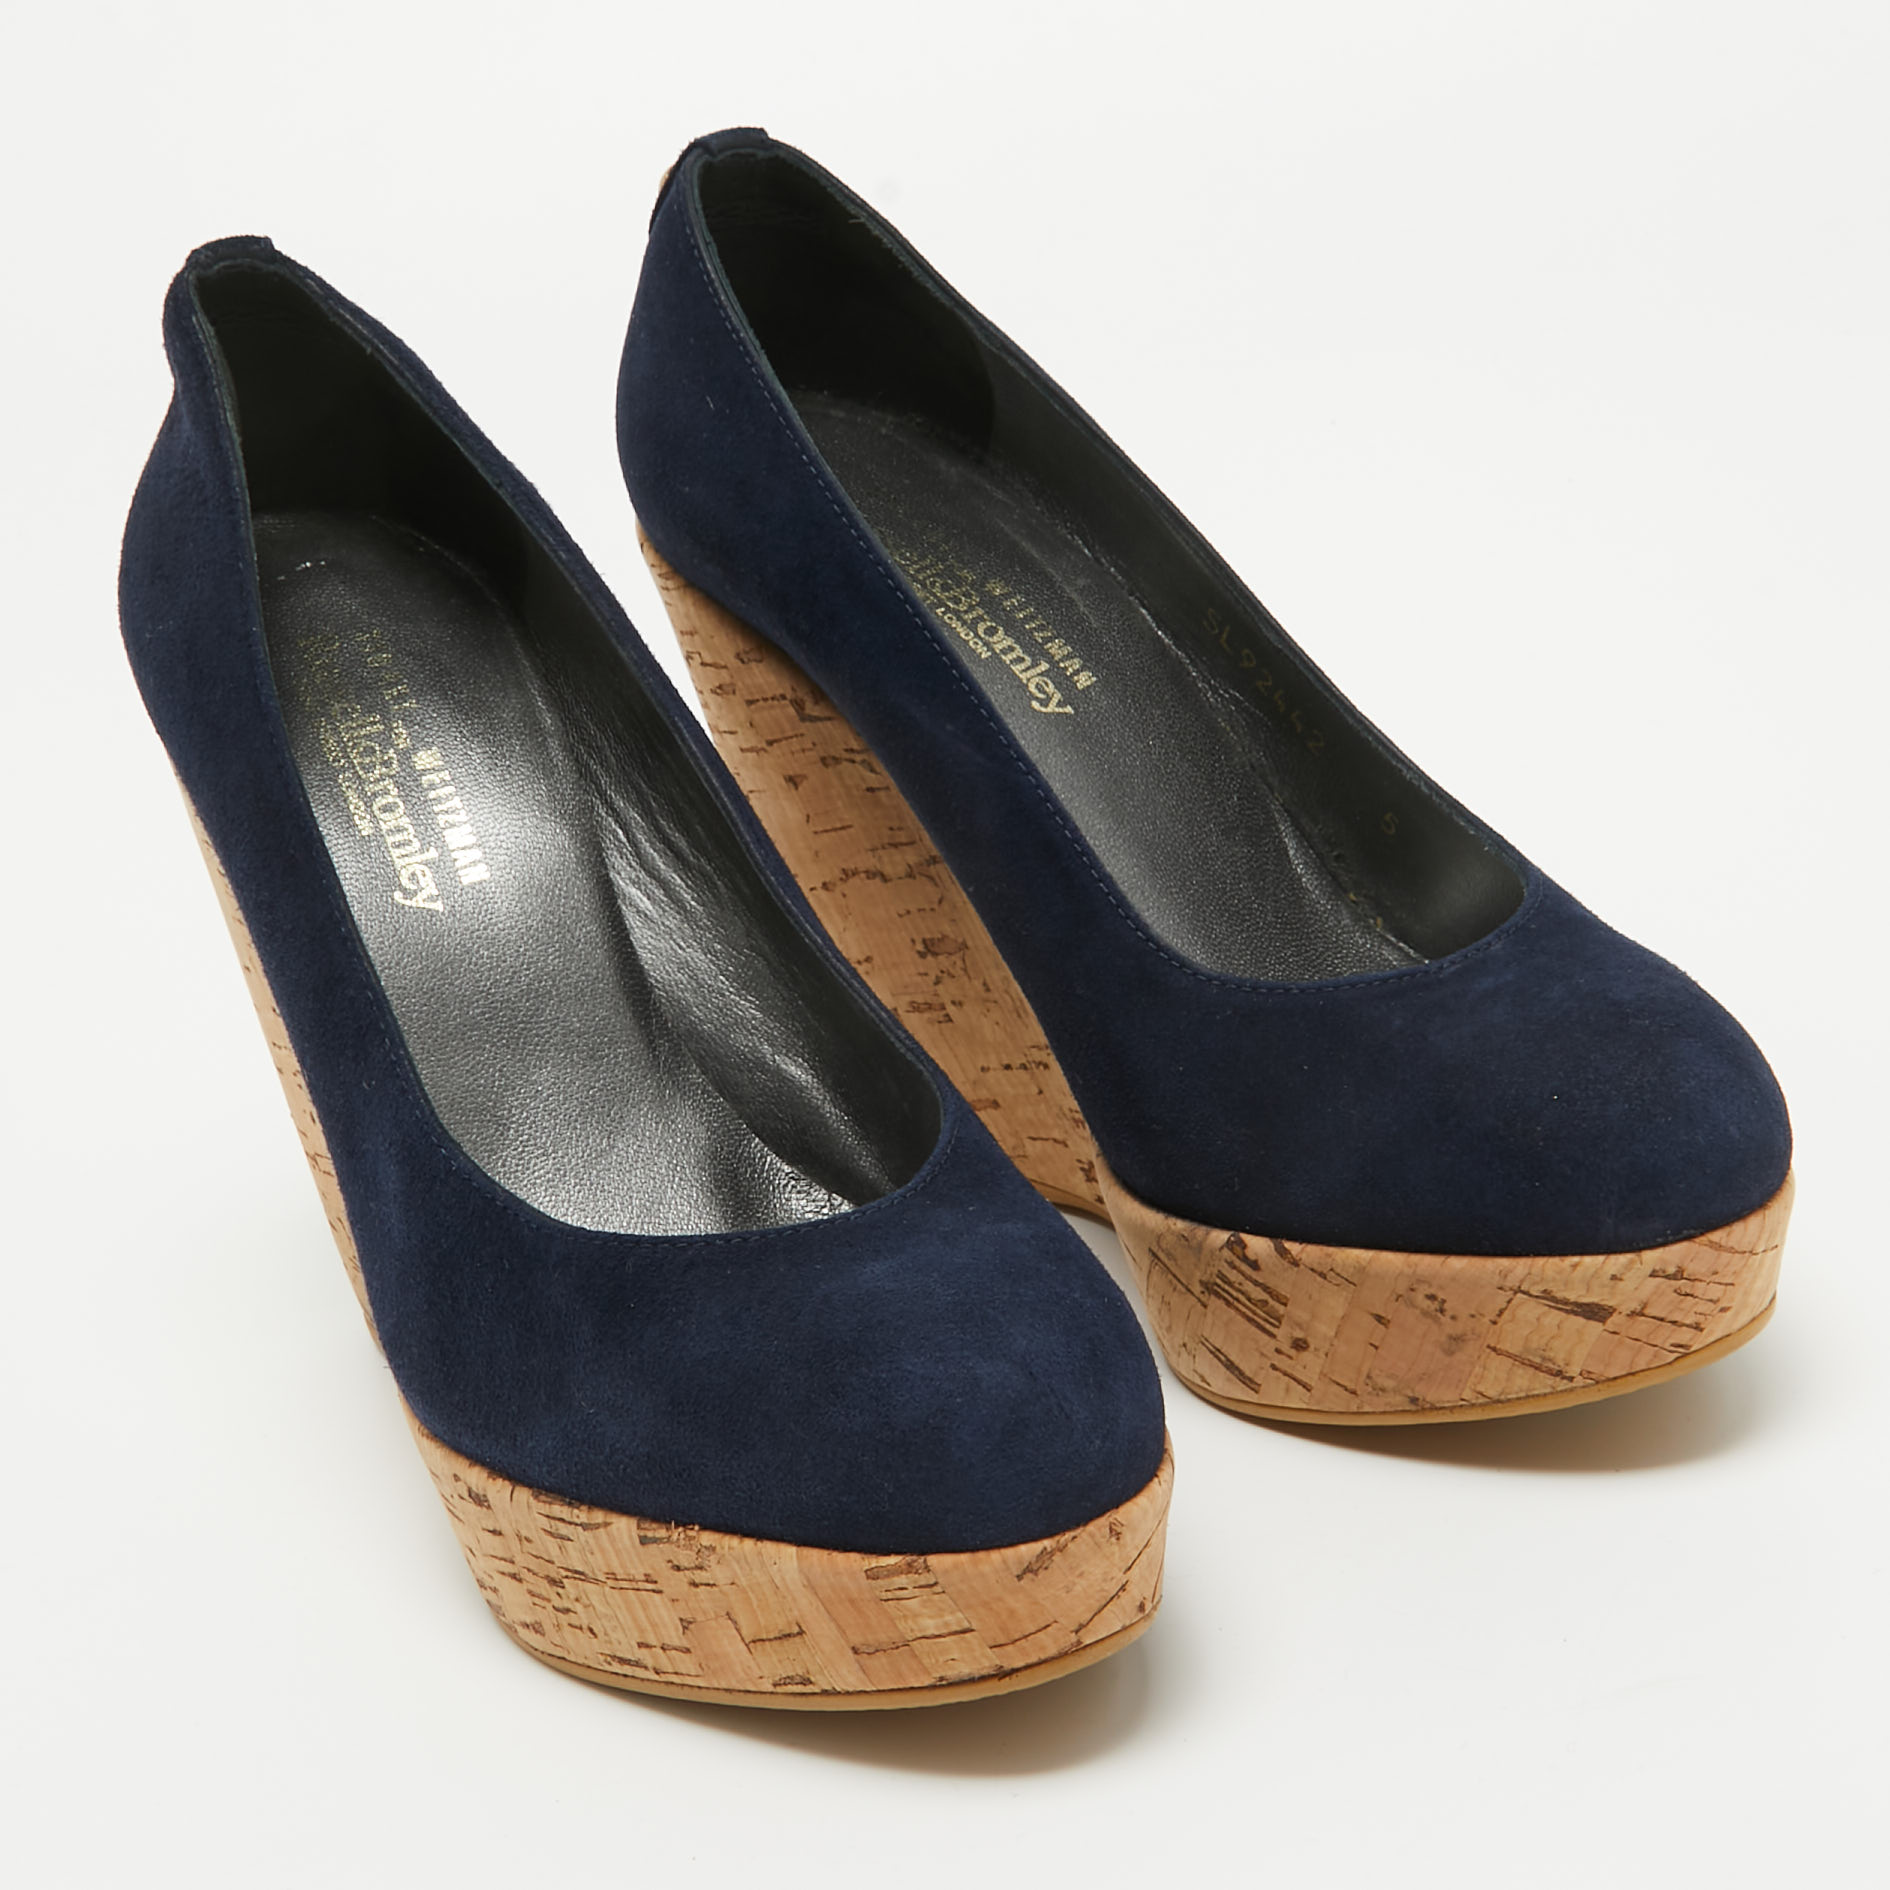 Stuart Weitzman X Russell Bromley Navy Blue Suede Corkswoon Wedge Pumps Size 35.5